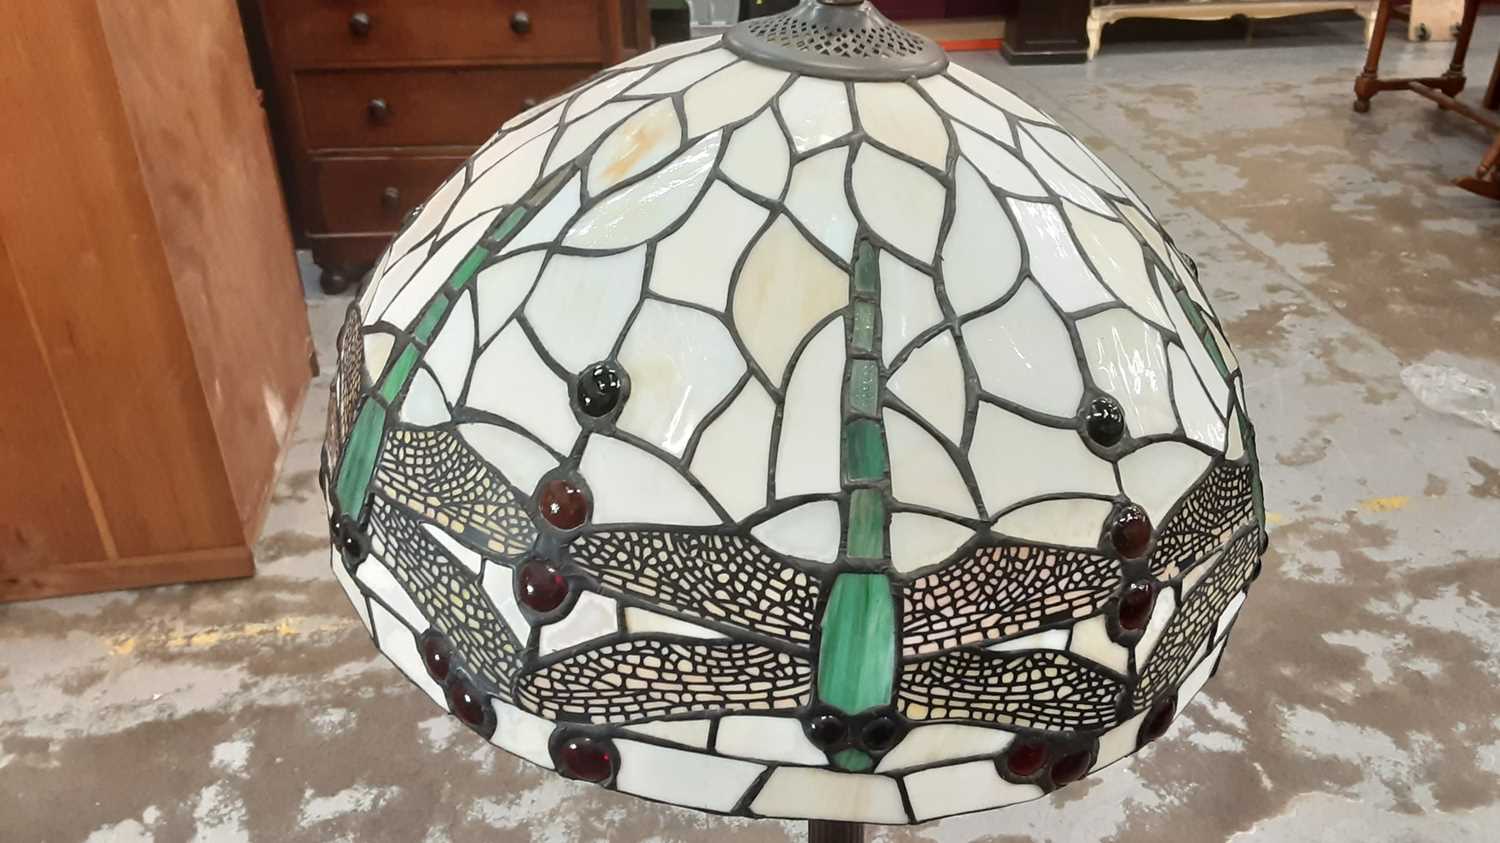 Tiffany style standard lamp with dragonfly shade, approximately 155cm high - Image 2 of 2